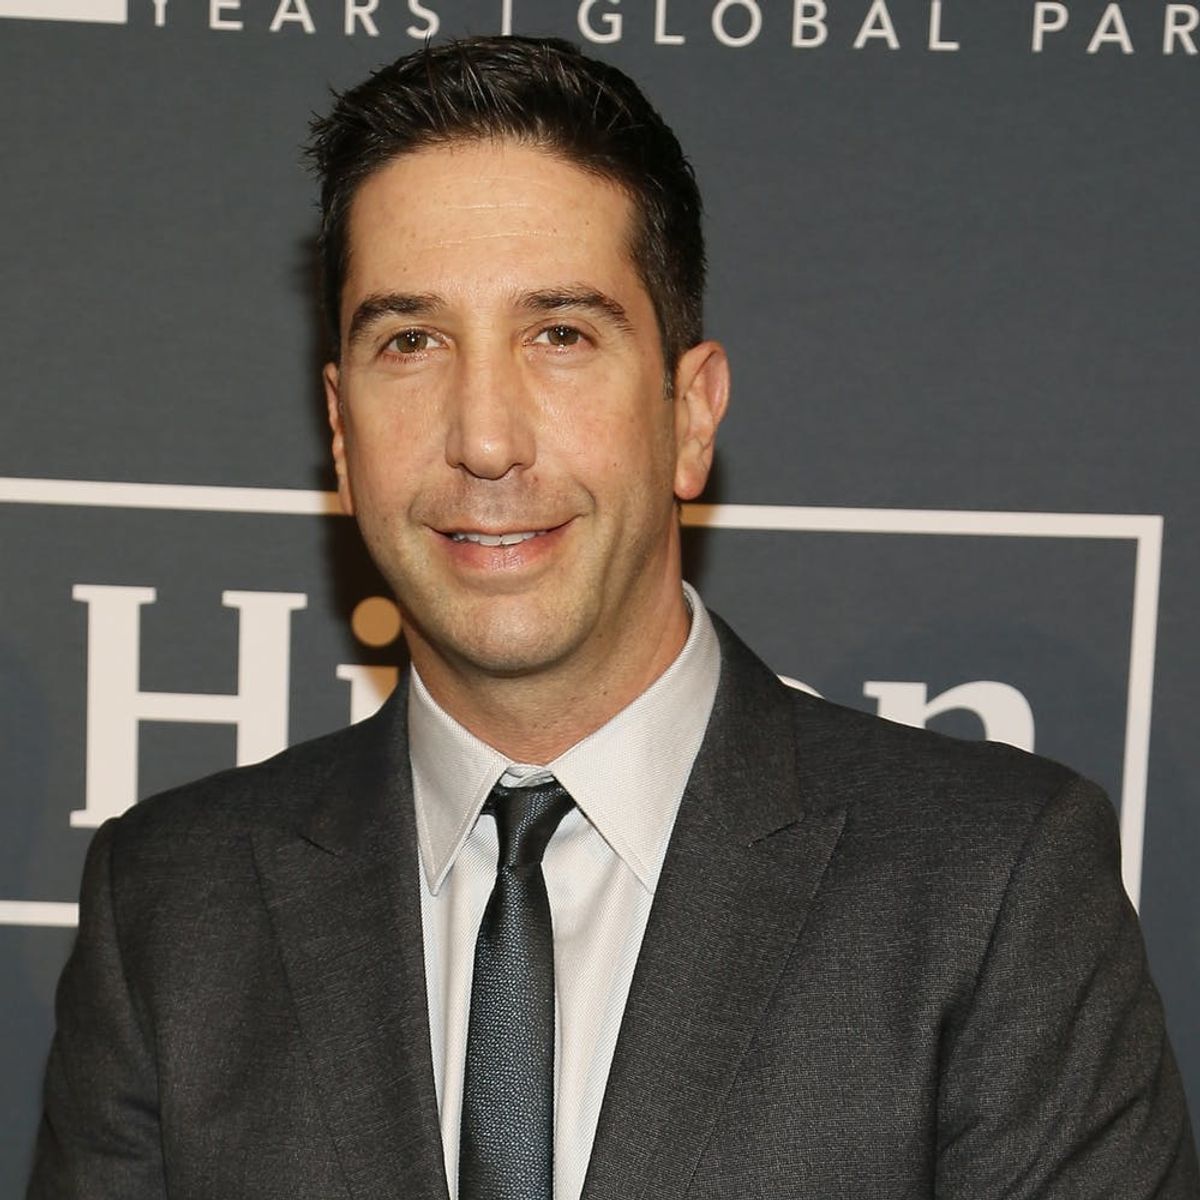 You Might Not Like What David Schwimmer Has to Say About a Possible ‘Friends’ Reunion